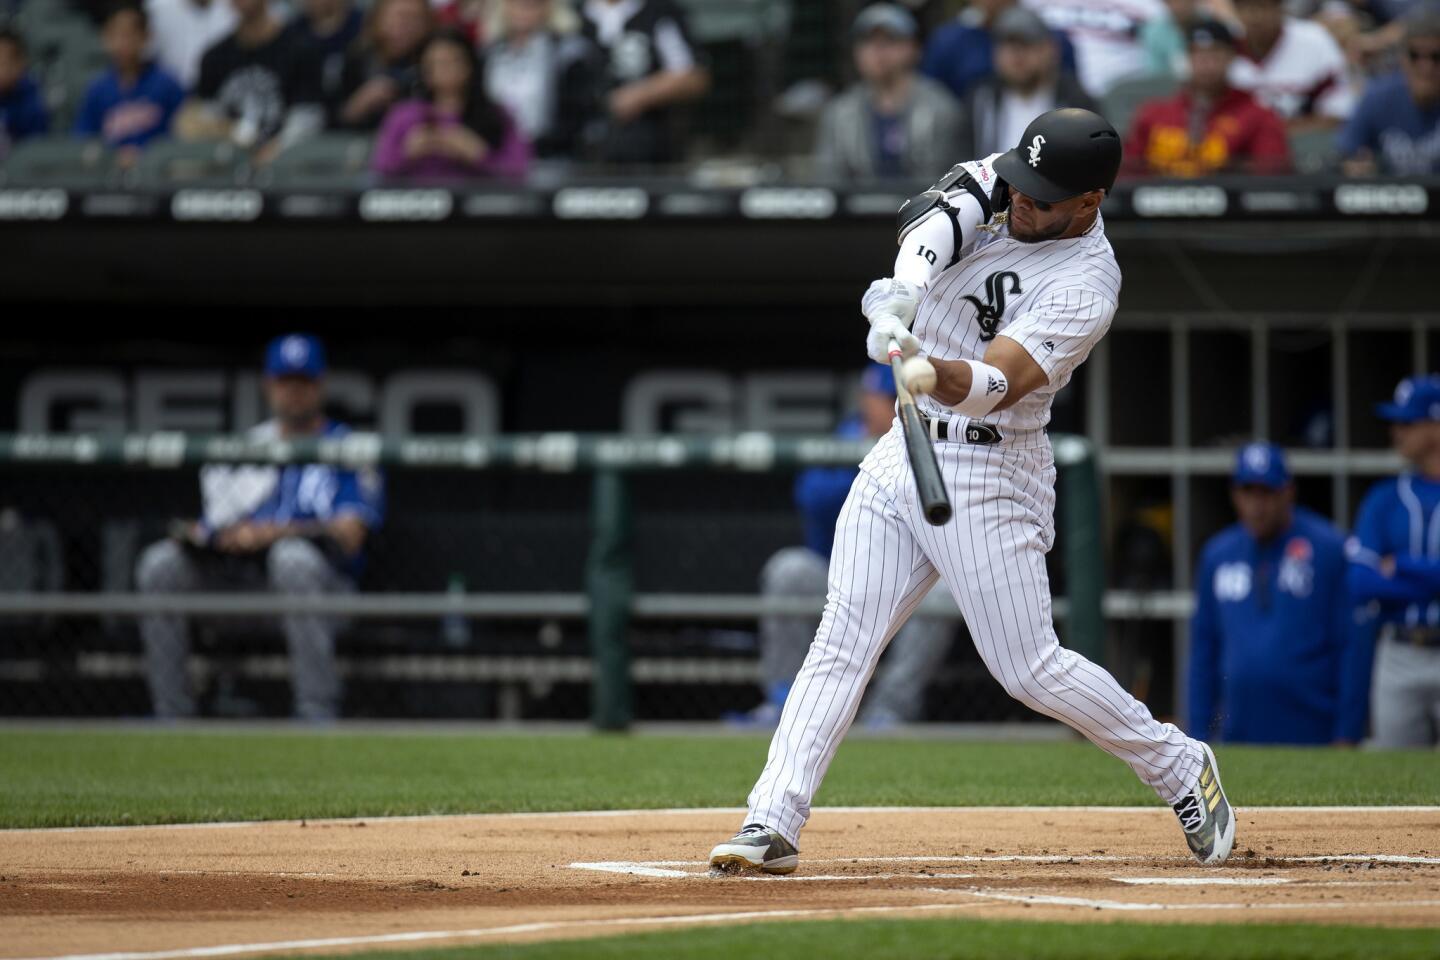 Yoan Moncada bats during a home game against the Royals on May 27, 2019.